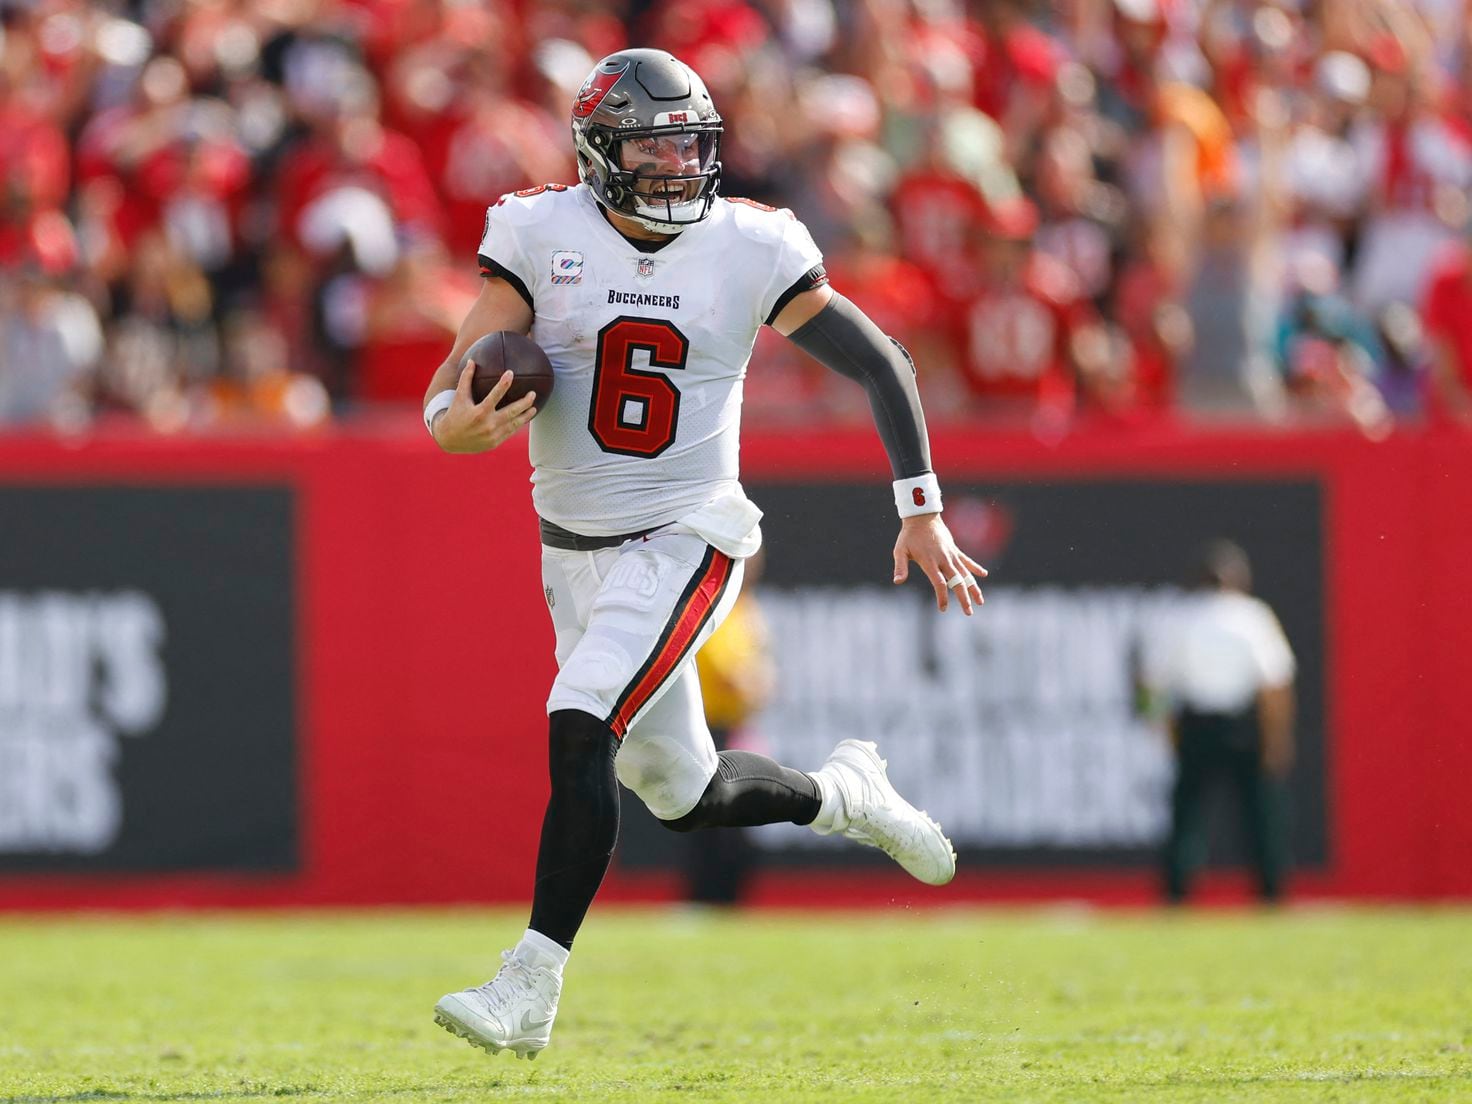 There's not a hotter quarterback on 3rd down than Bucs' Baker Mayfield